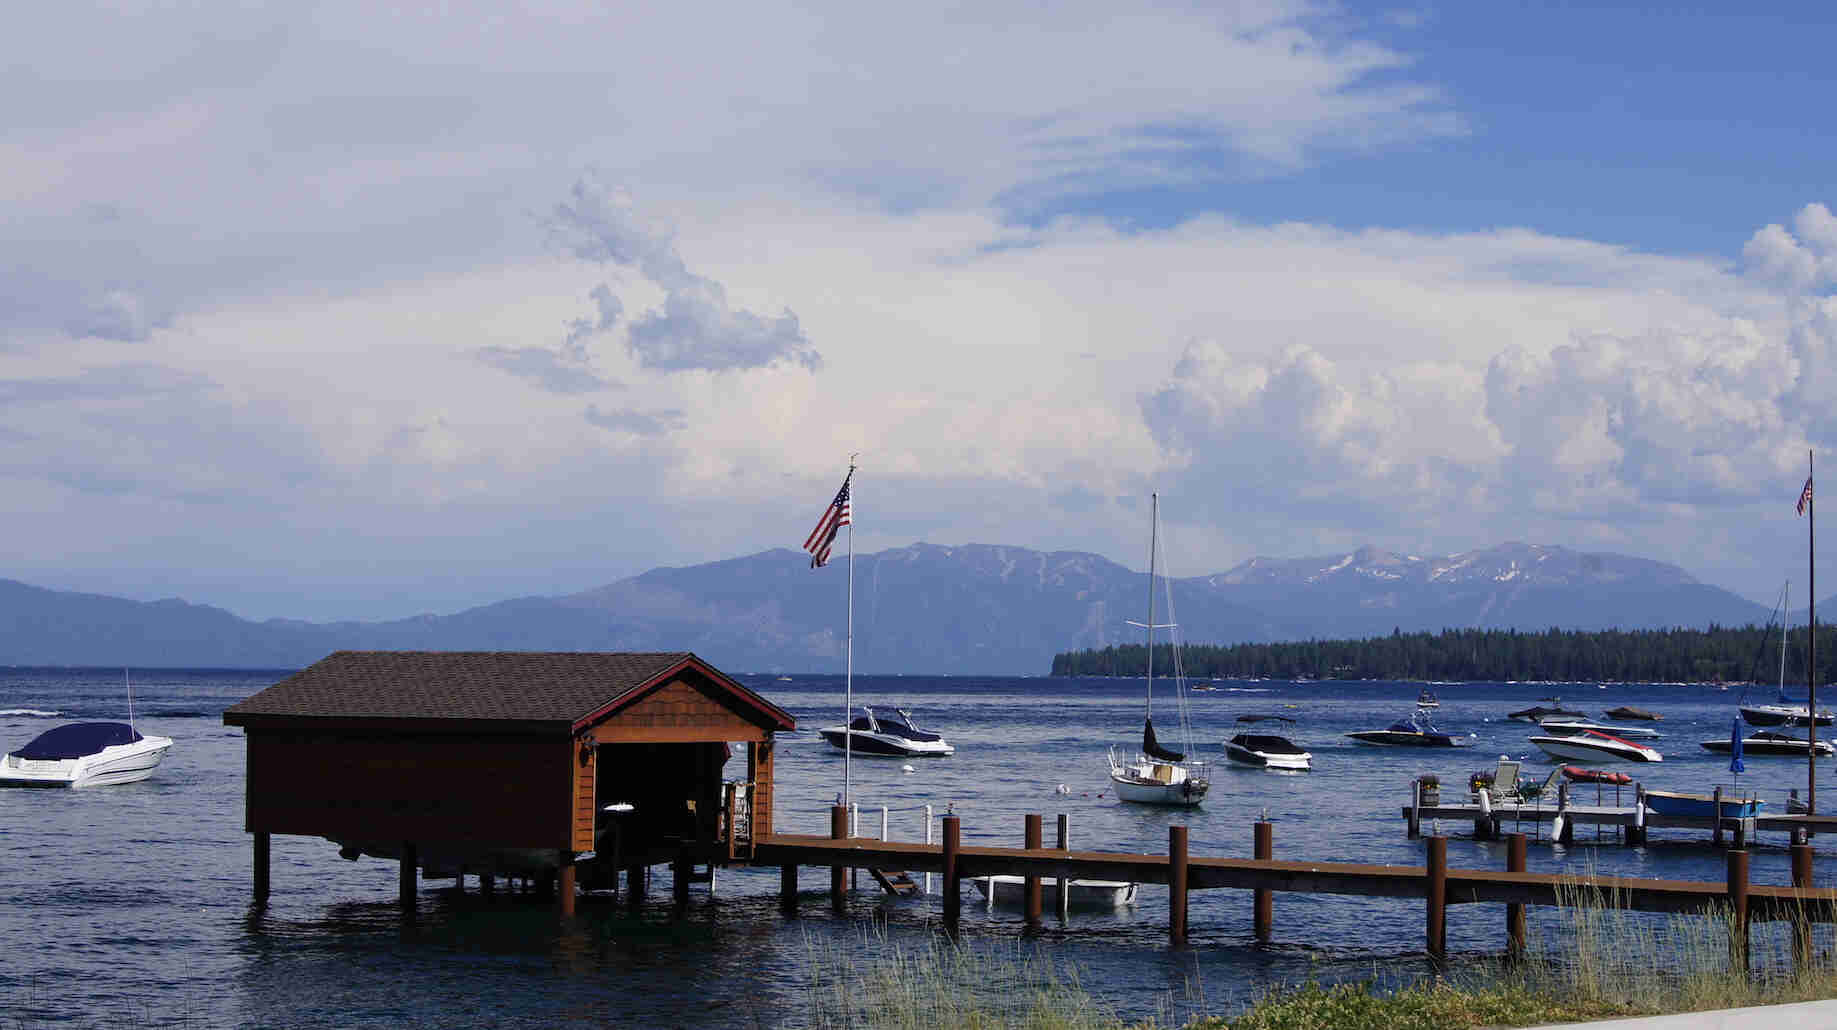 A dock with a boat house at the end, on a lake with boats, and mountains in the background